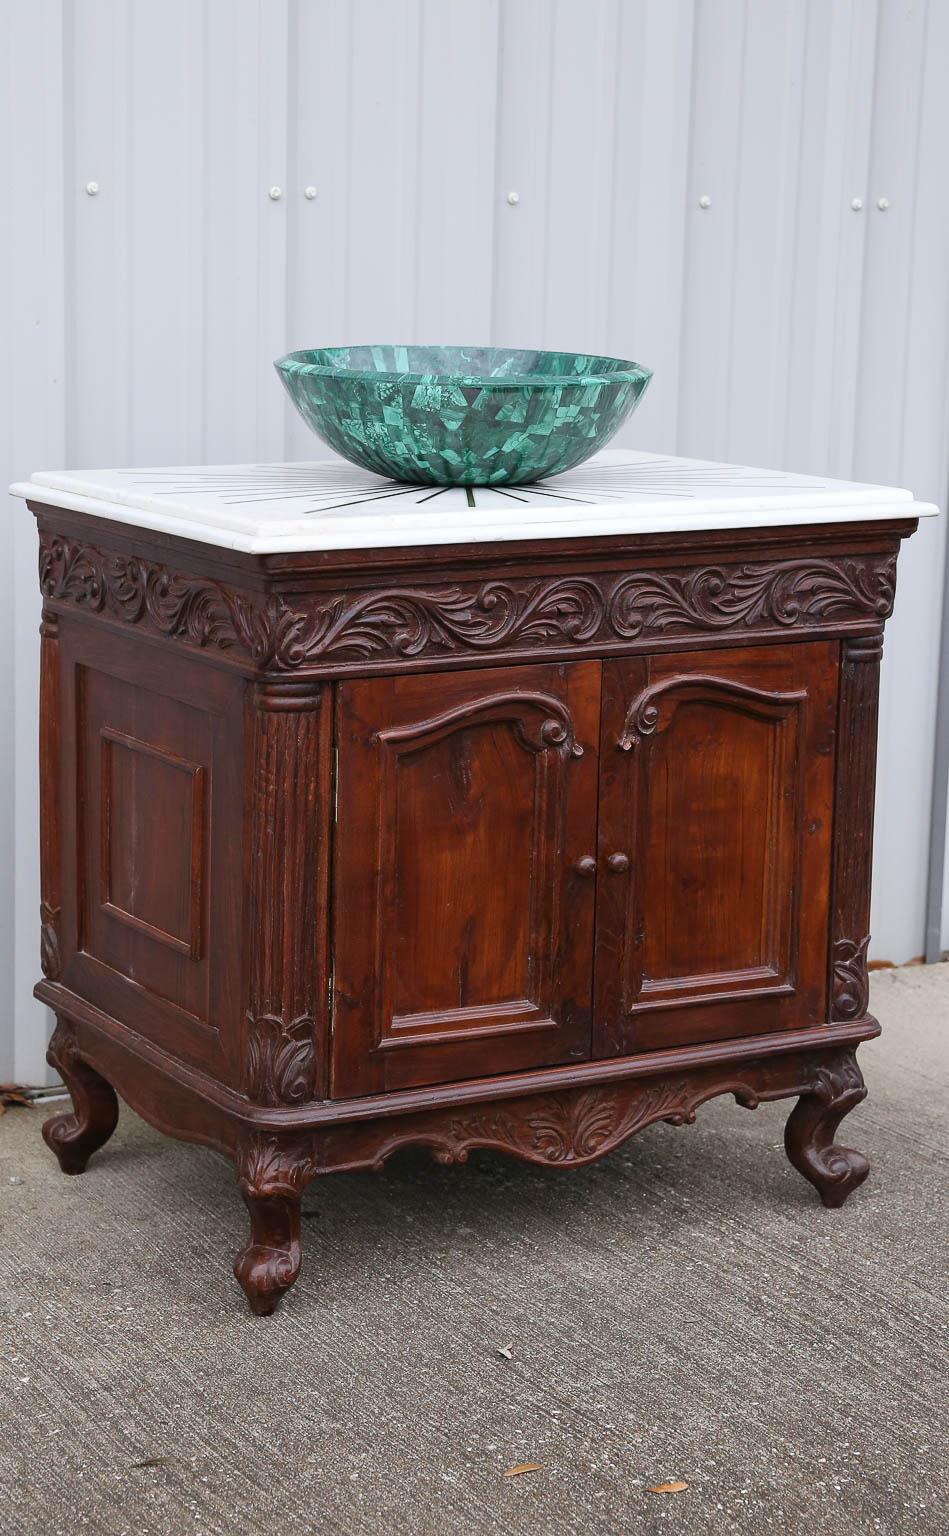 This unique vanity is part of wedding gifts given by a rich family in the west coast of Gujerat during elaborate marriage ceremony. The counter top is a fine white marble inlaid with brass. It sits on top of a handcrafted and carved teak wood